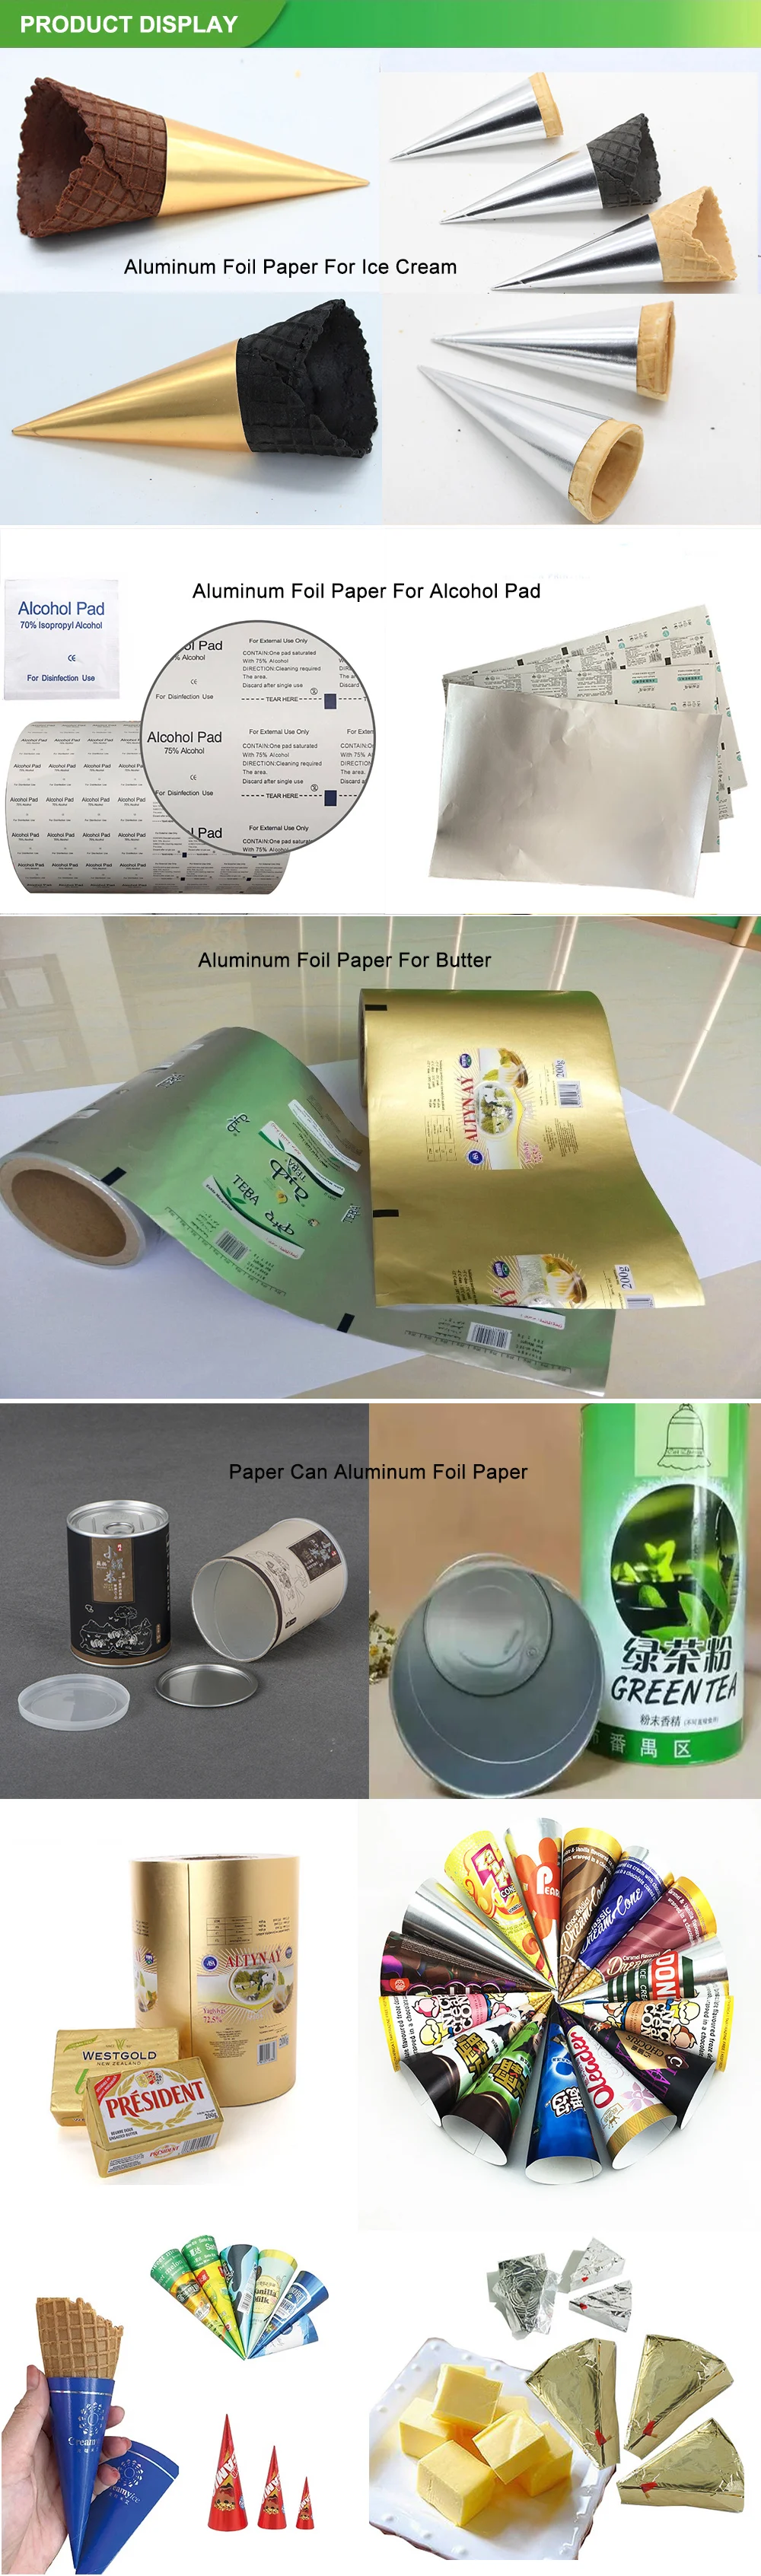 Foil Wrapping Paper